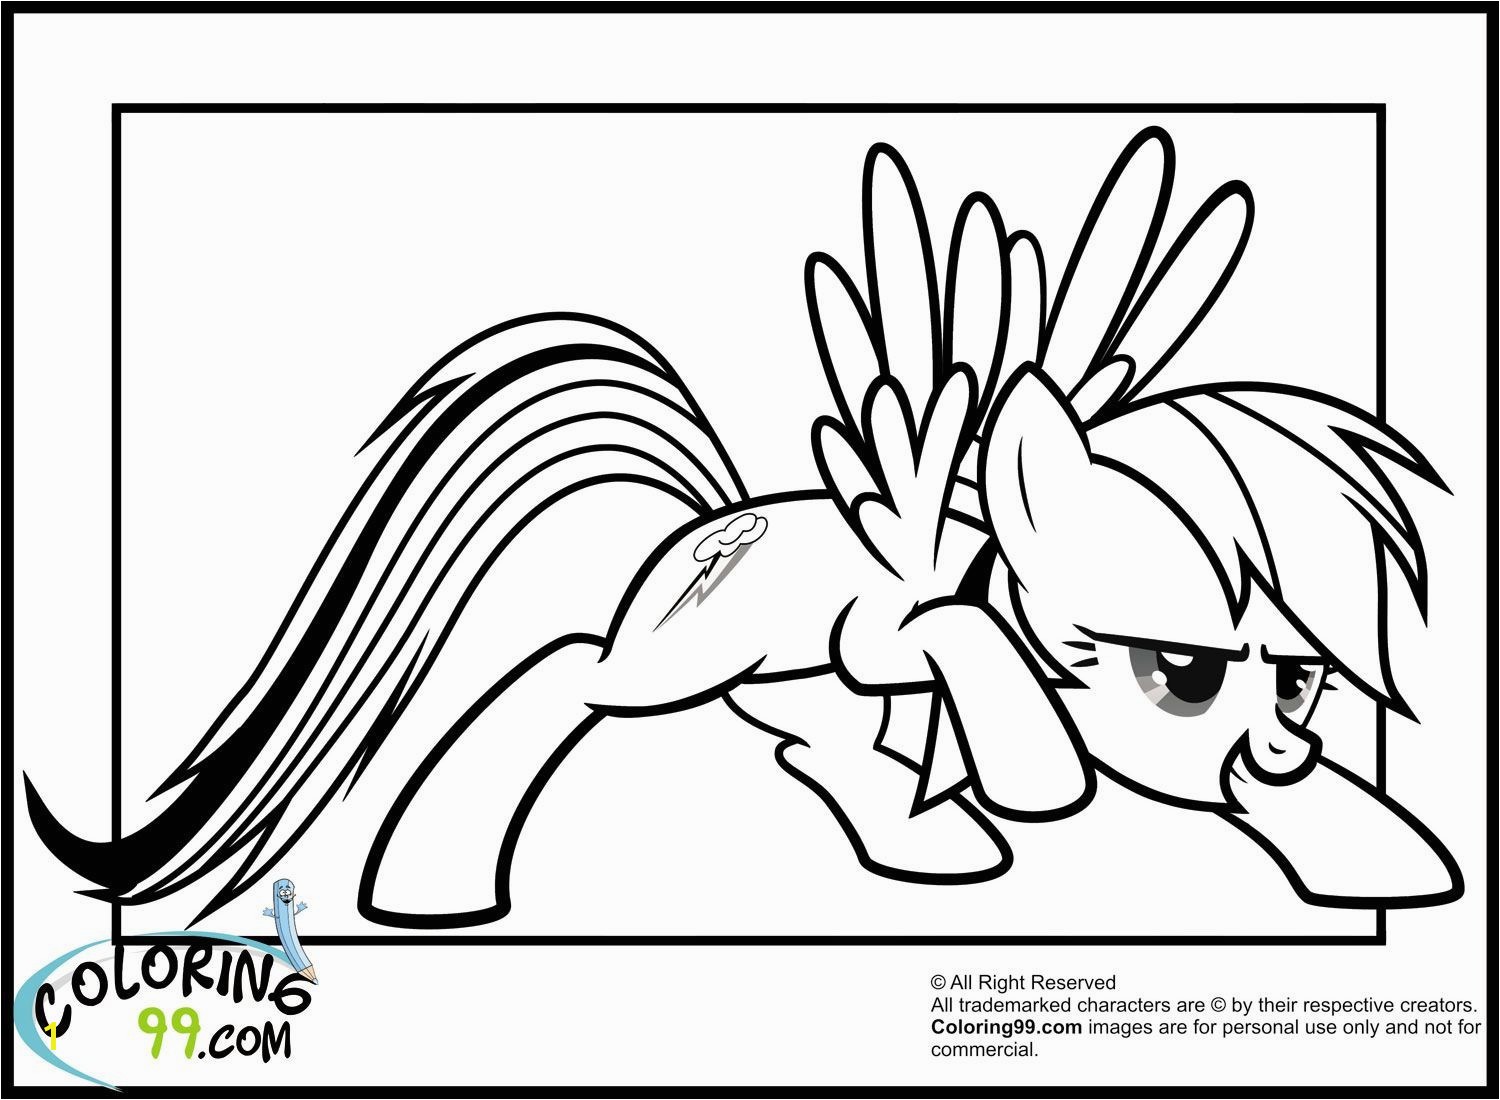 Garnet Coloring Pages Beautiful Mlp Printable Coloring Pages Garnet Coloring Pages Beautiful Best Coloring Pages